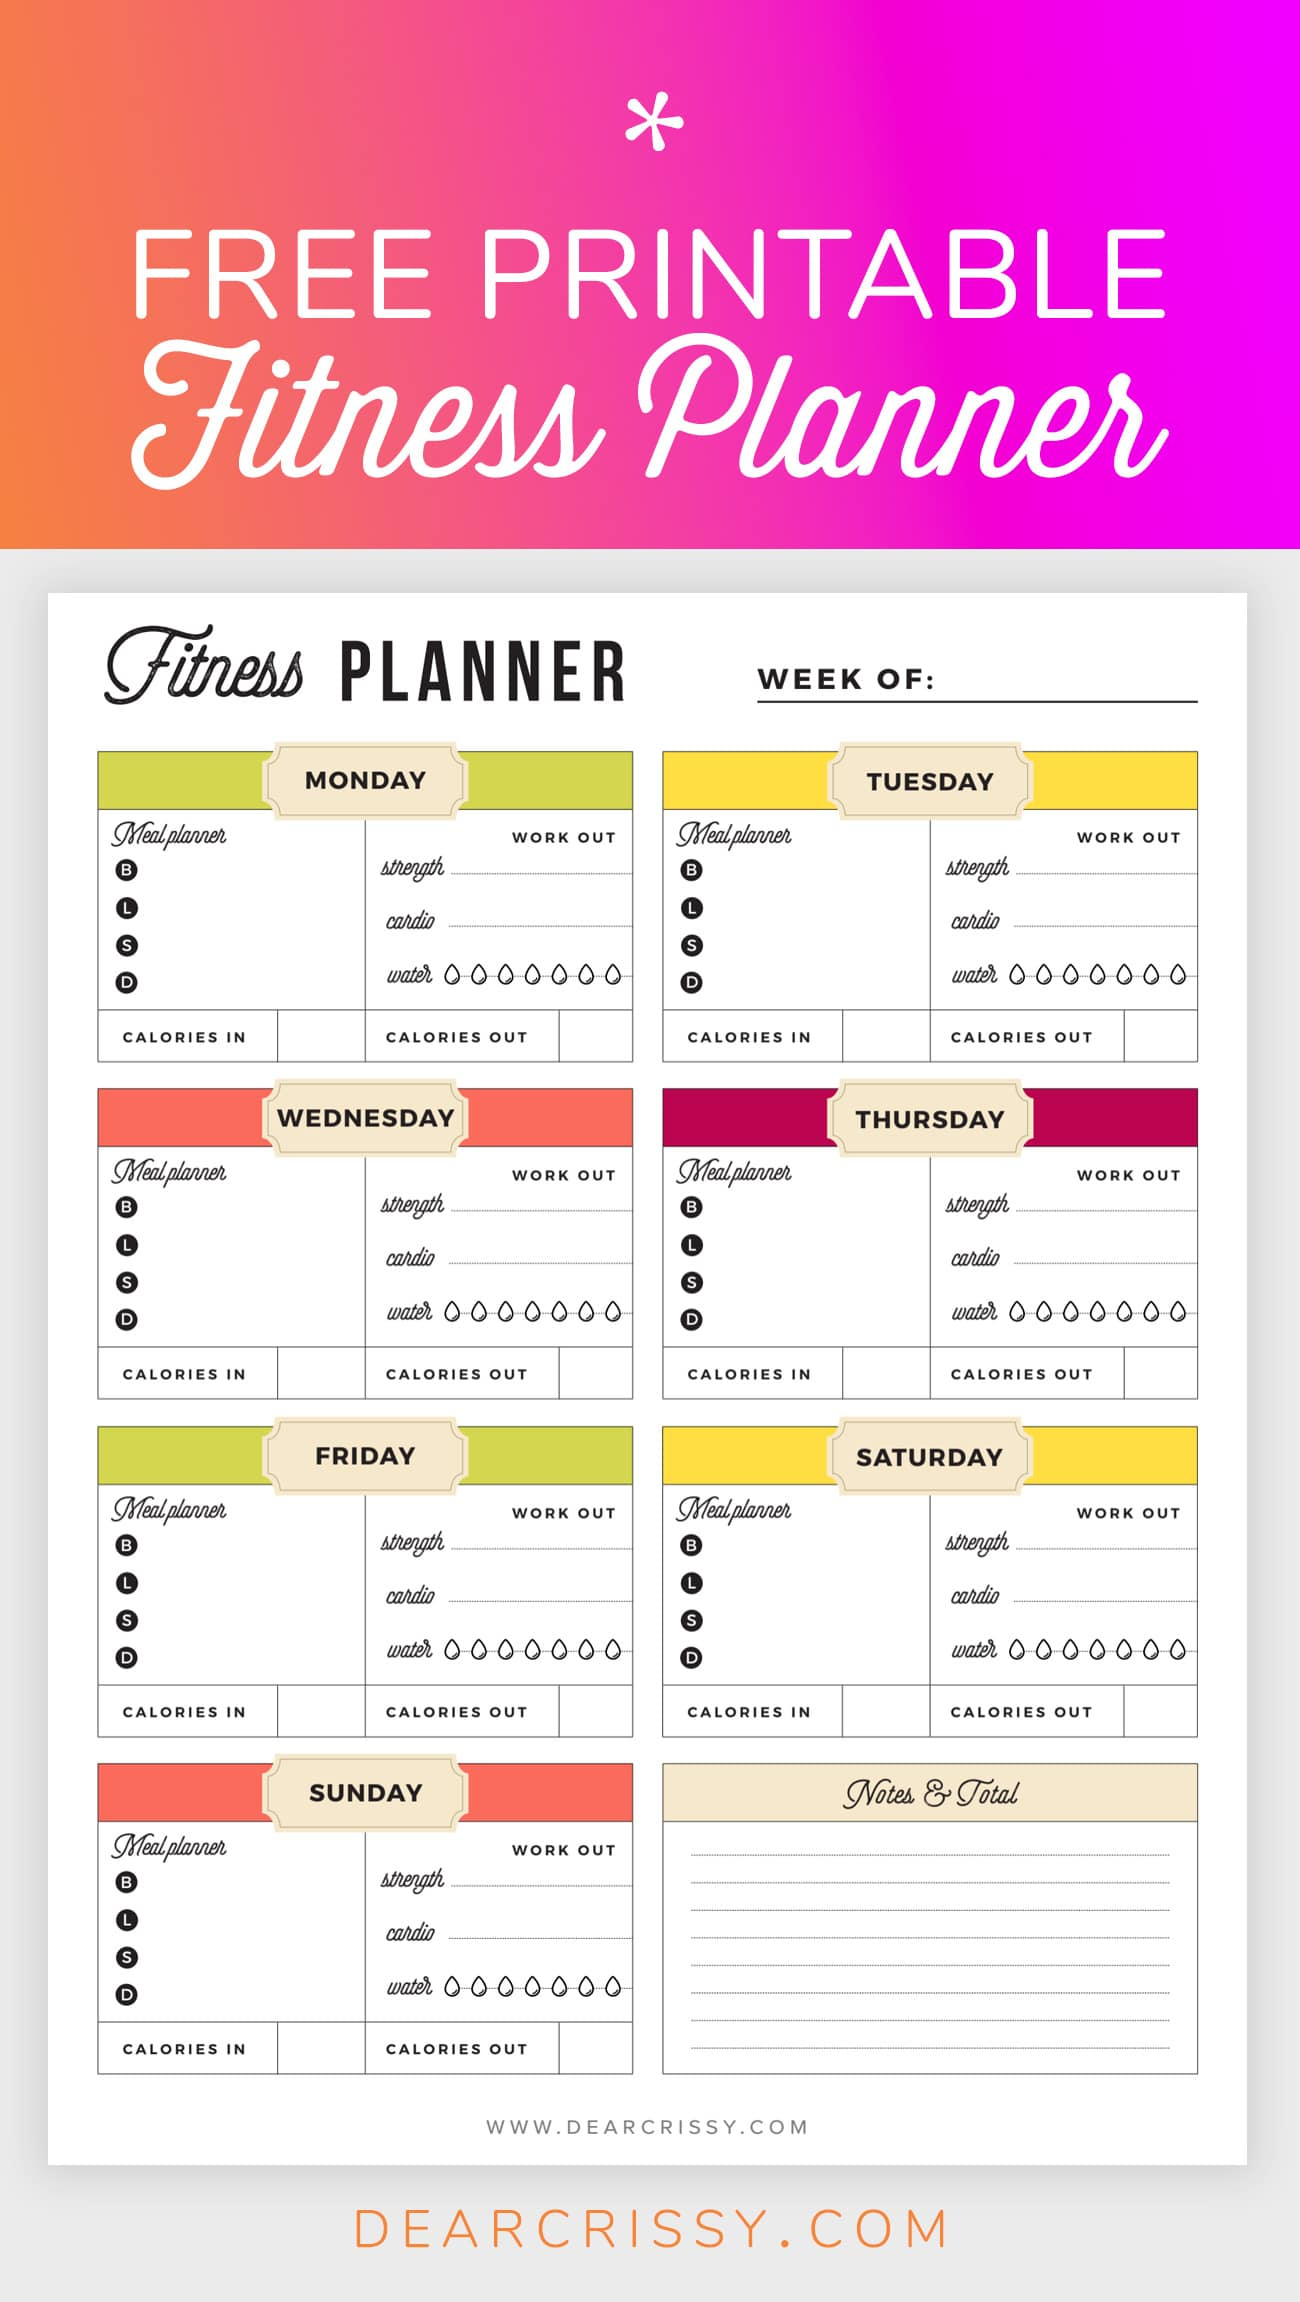 Free Printable Fitness Planner - Meal And Fitness Tracker, Start Today! - Free Printable Fitness Planner